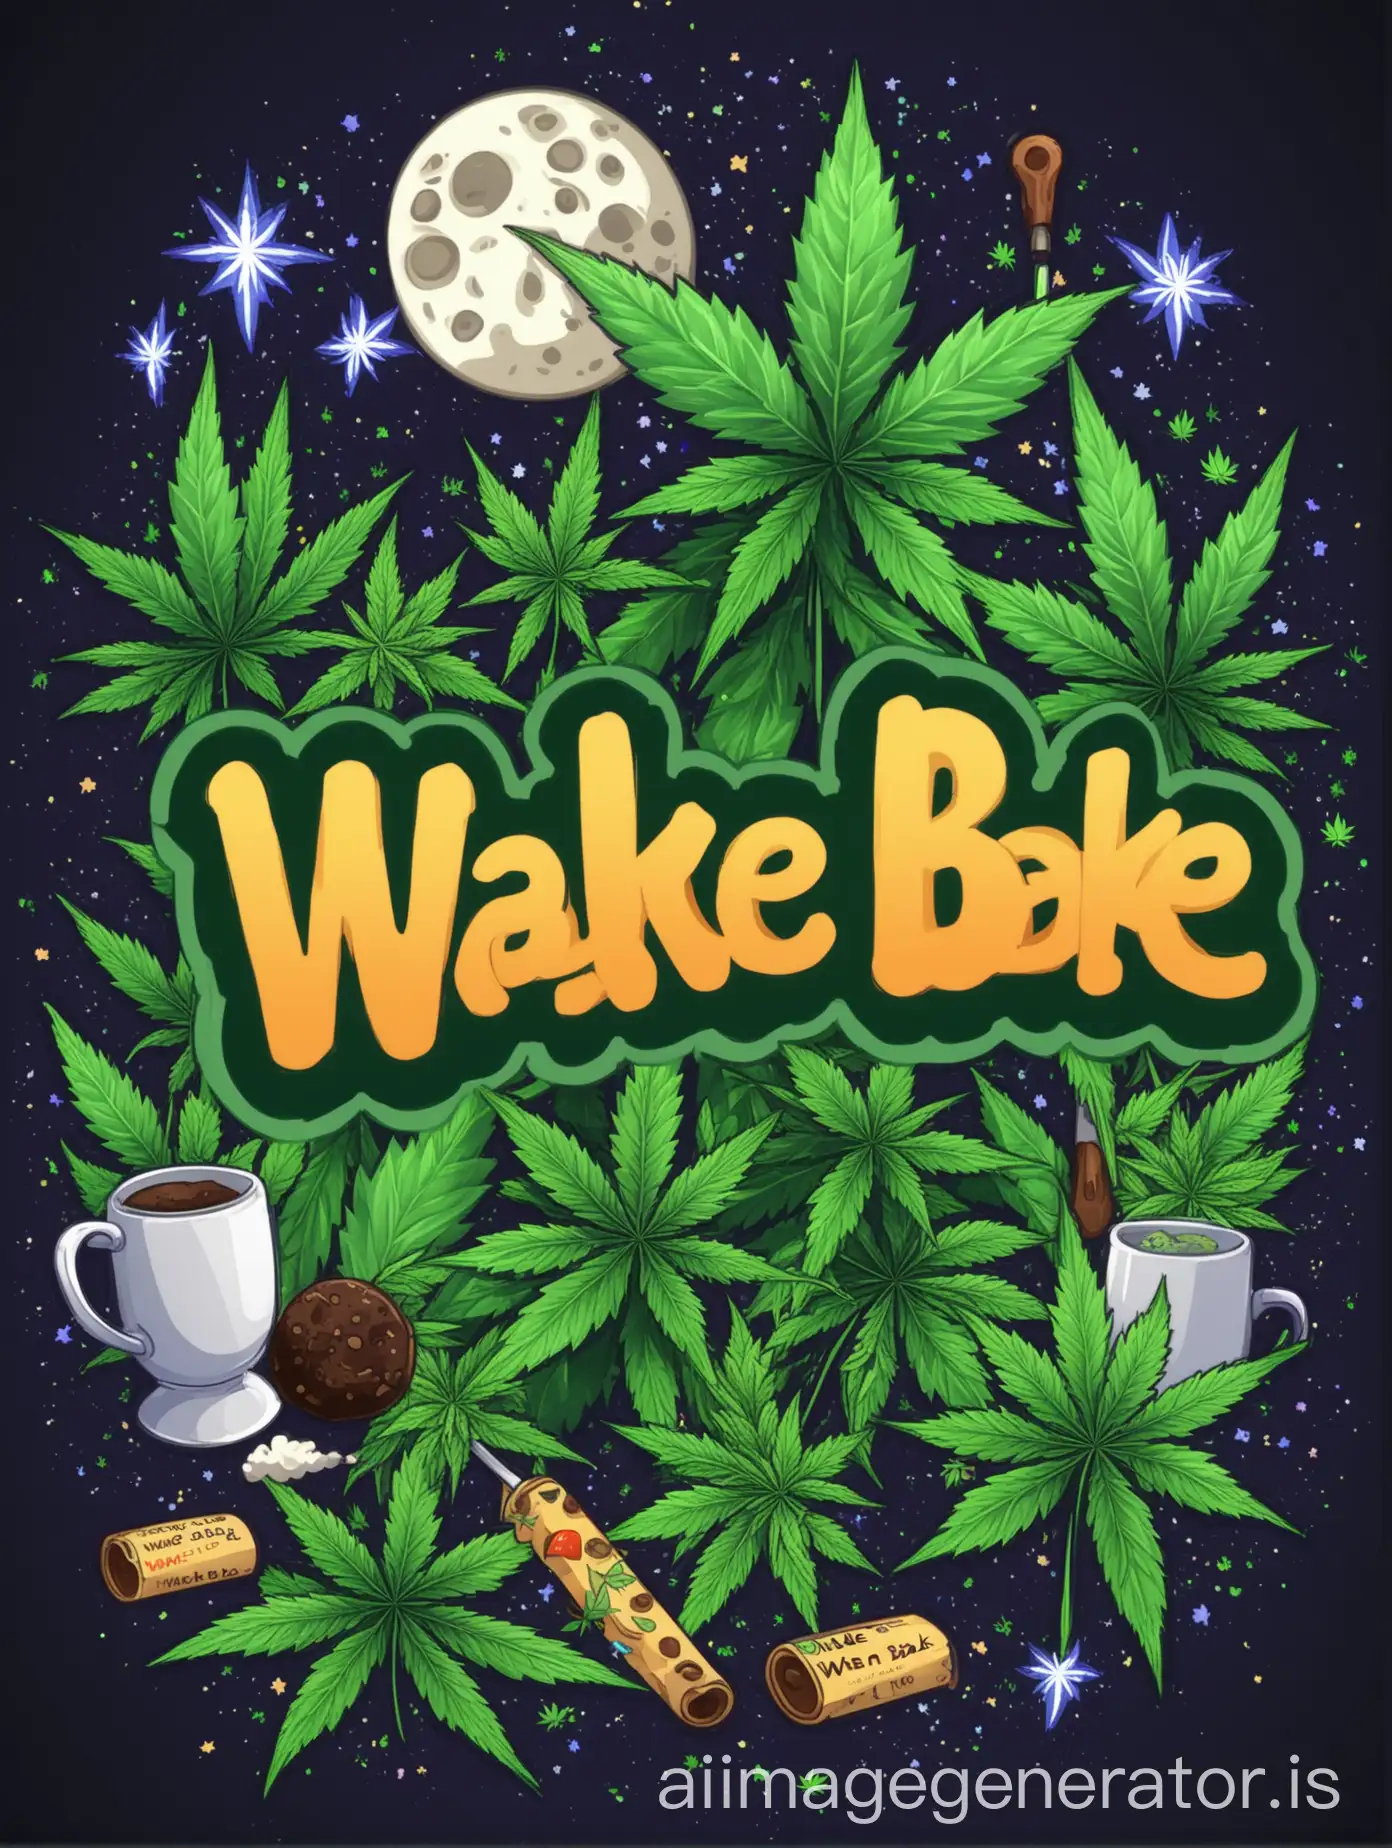 can you generate server invite background for discord and make it  space and weed themed with text that says 'Wake N' Bake'